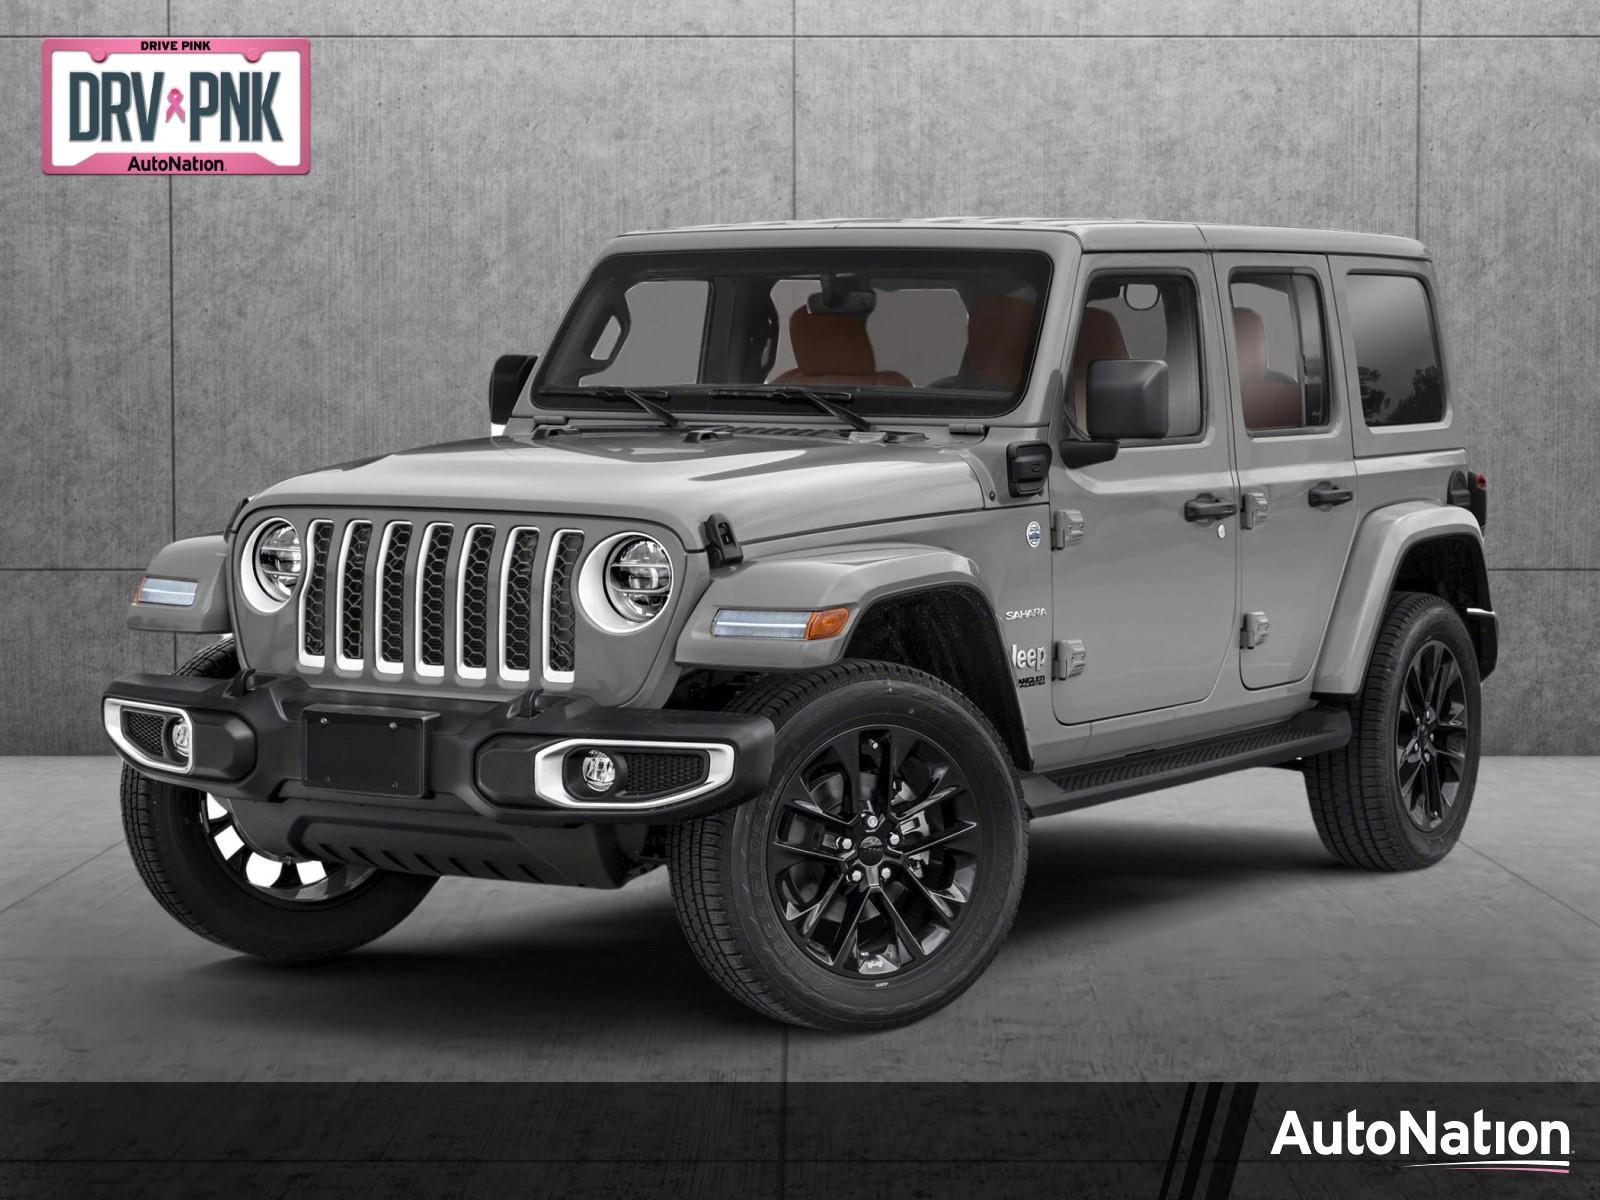 NEW 2023 Jeep Wrangler 4xe for sale in Englewood, CO 80112 - AutoNation